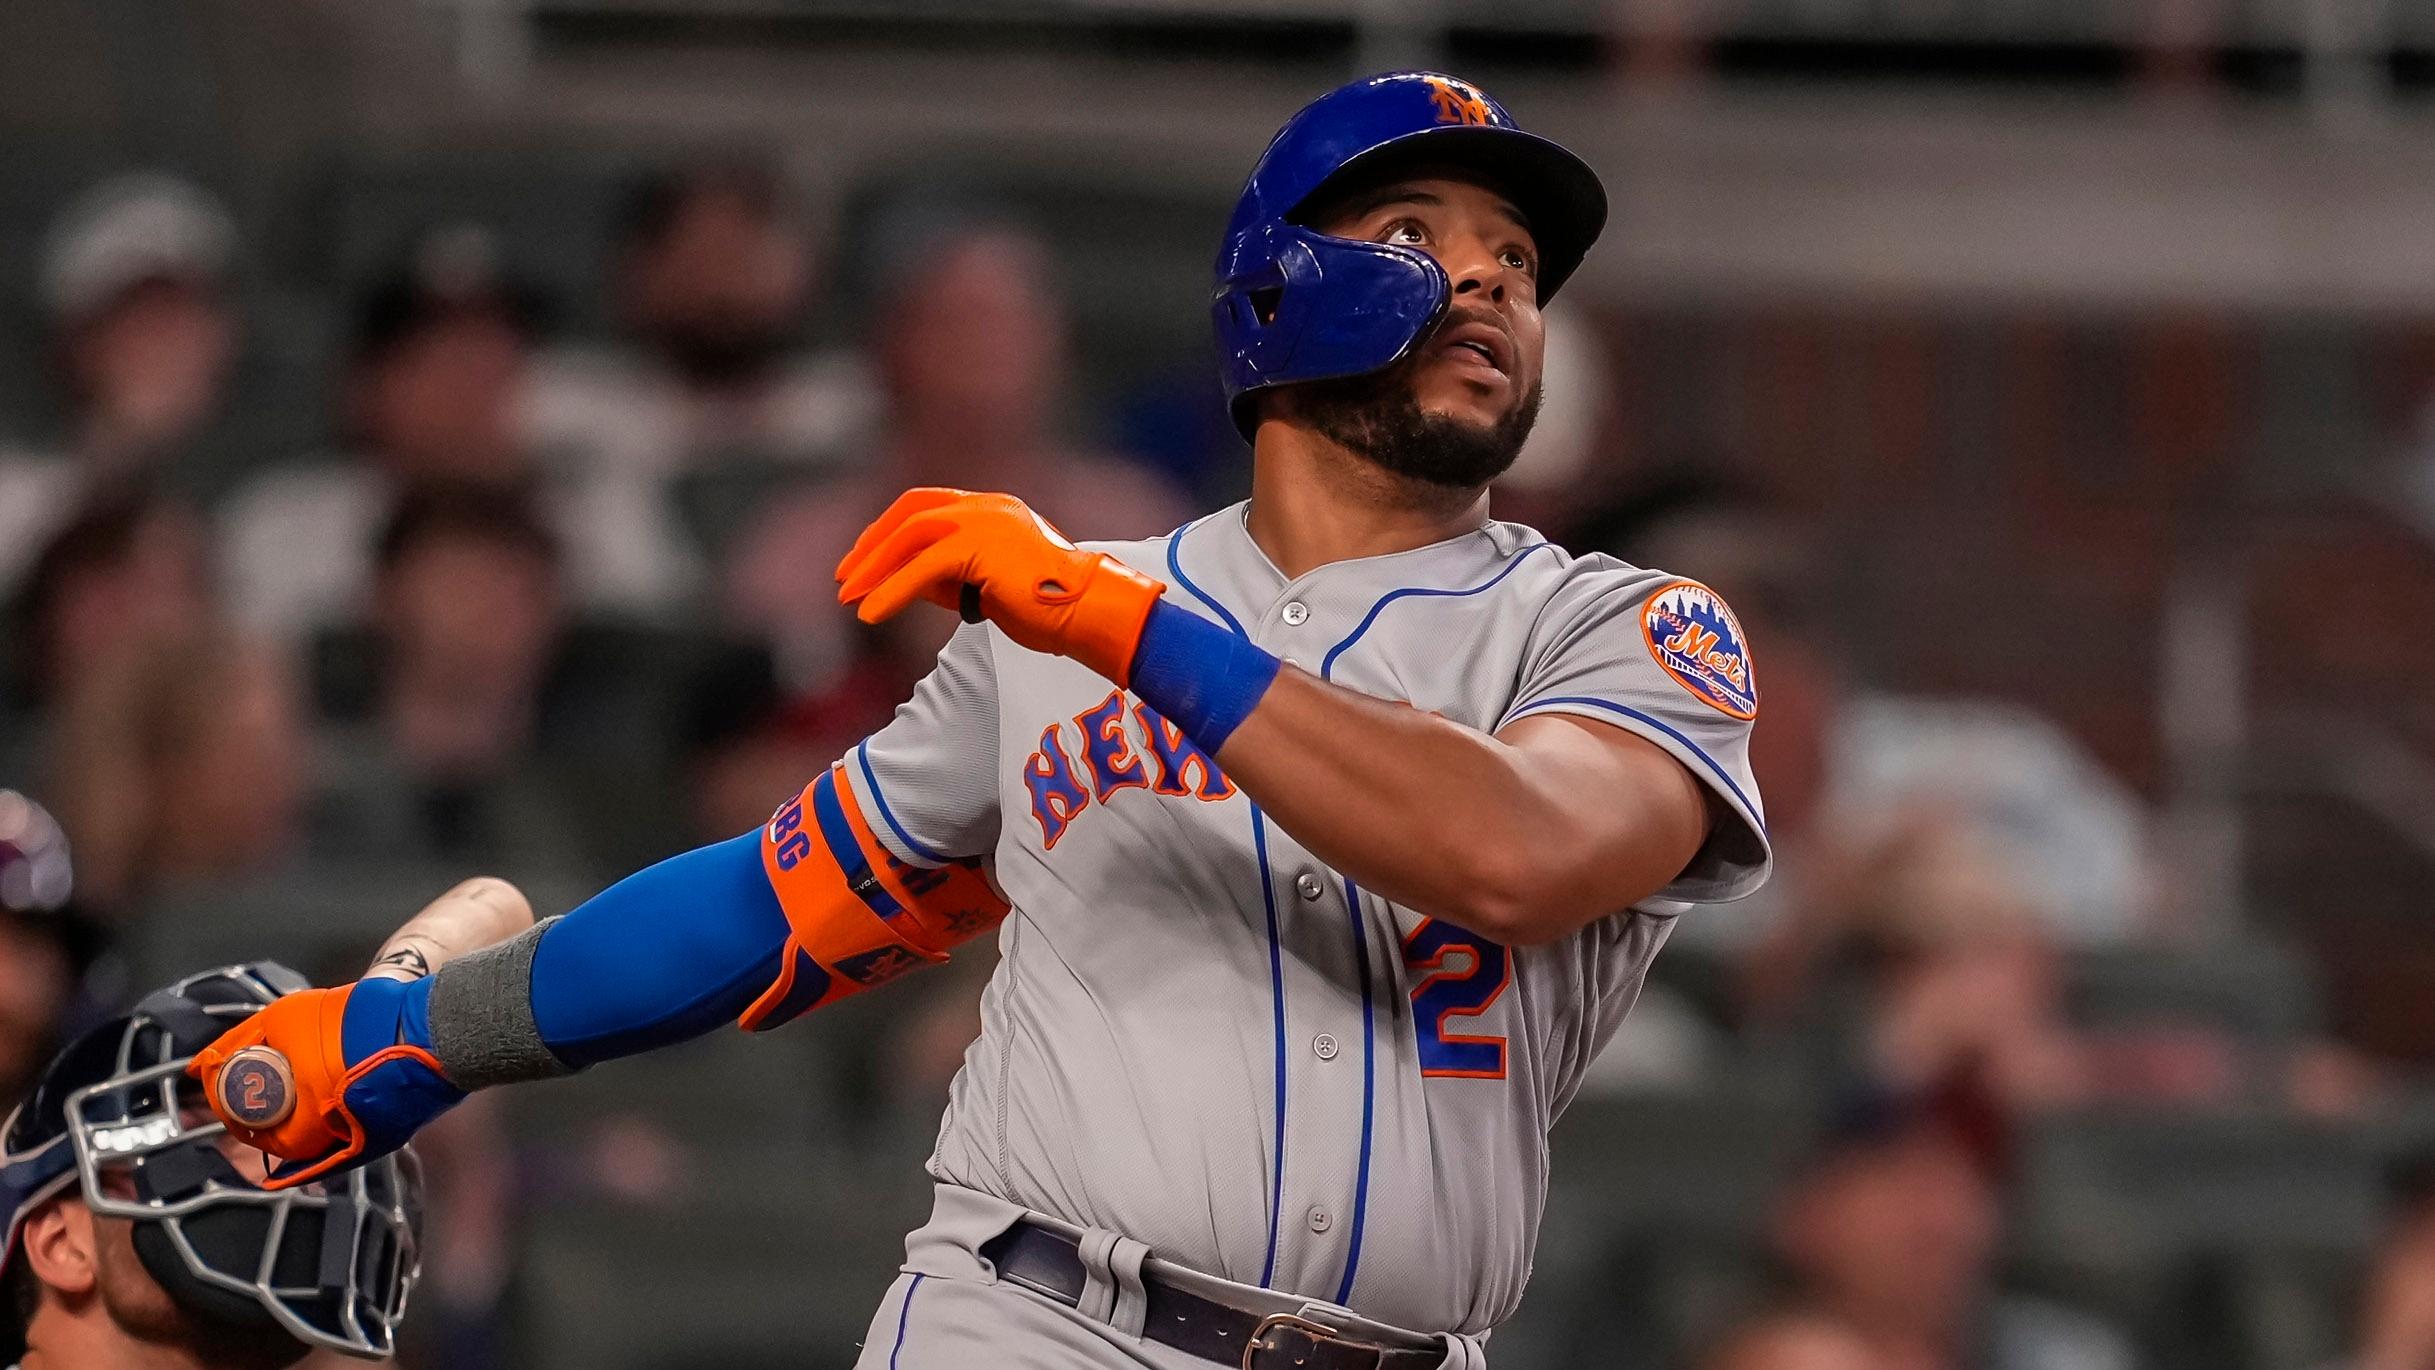 Jul 1, 2021; Cumberland, Georgia, USA; New York Mets left fielder Dominic Smith (2) hits a solo home run against the Atlanta Braves during the ninth inning at Truist Park. / Mandatory Credit: Dale Zanine-USA TODAY Sports